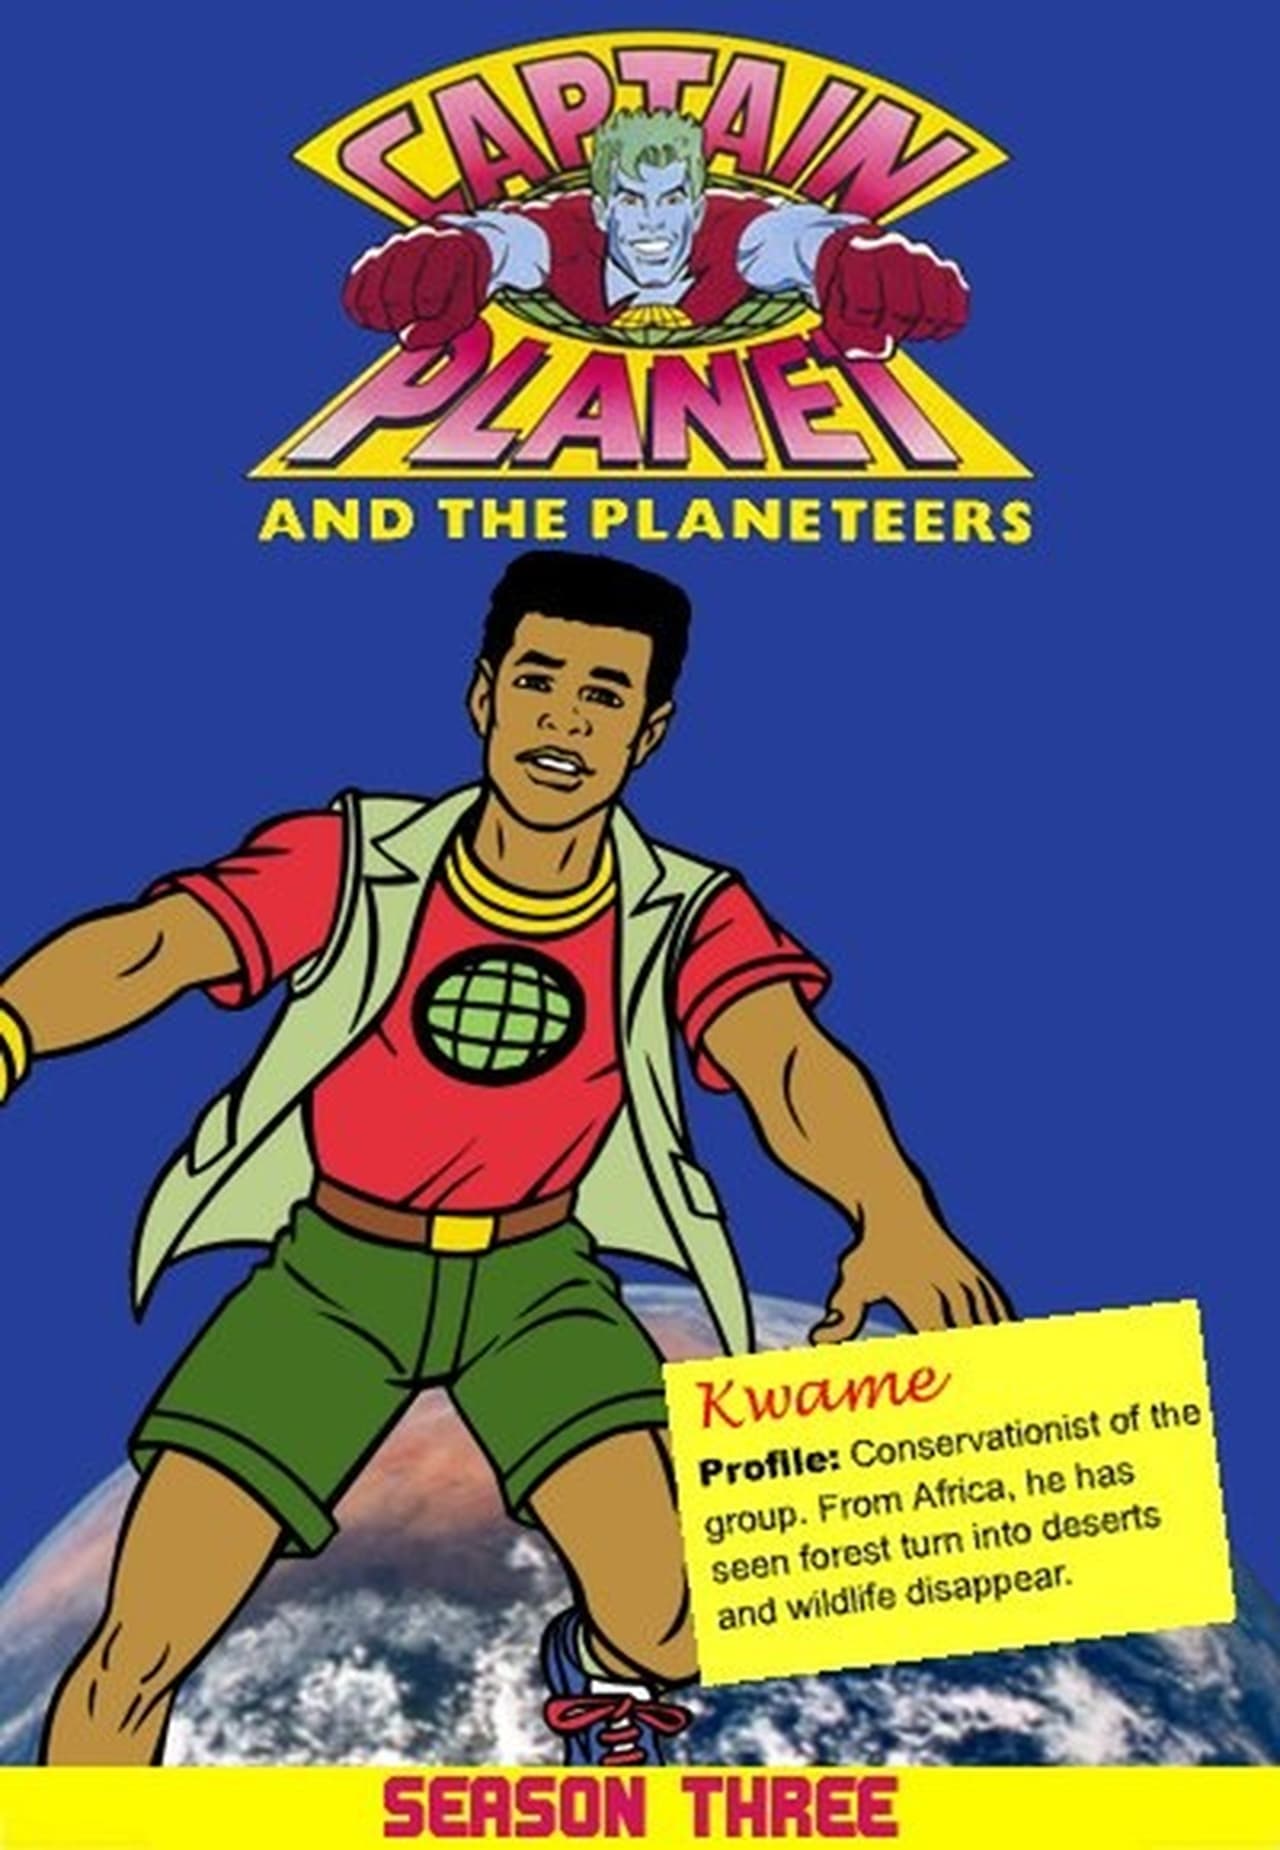 Captain Planet And The Planeteers Season 3